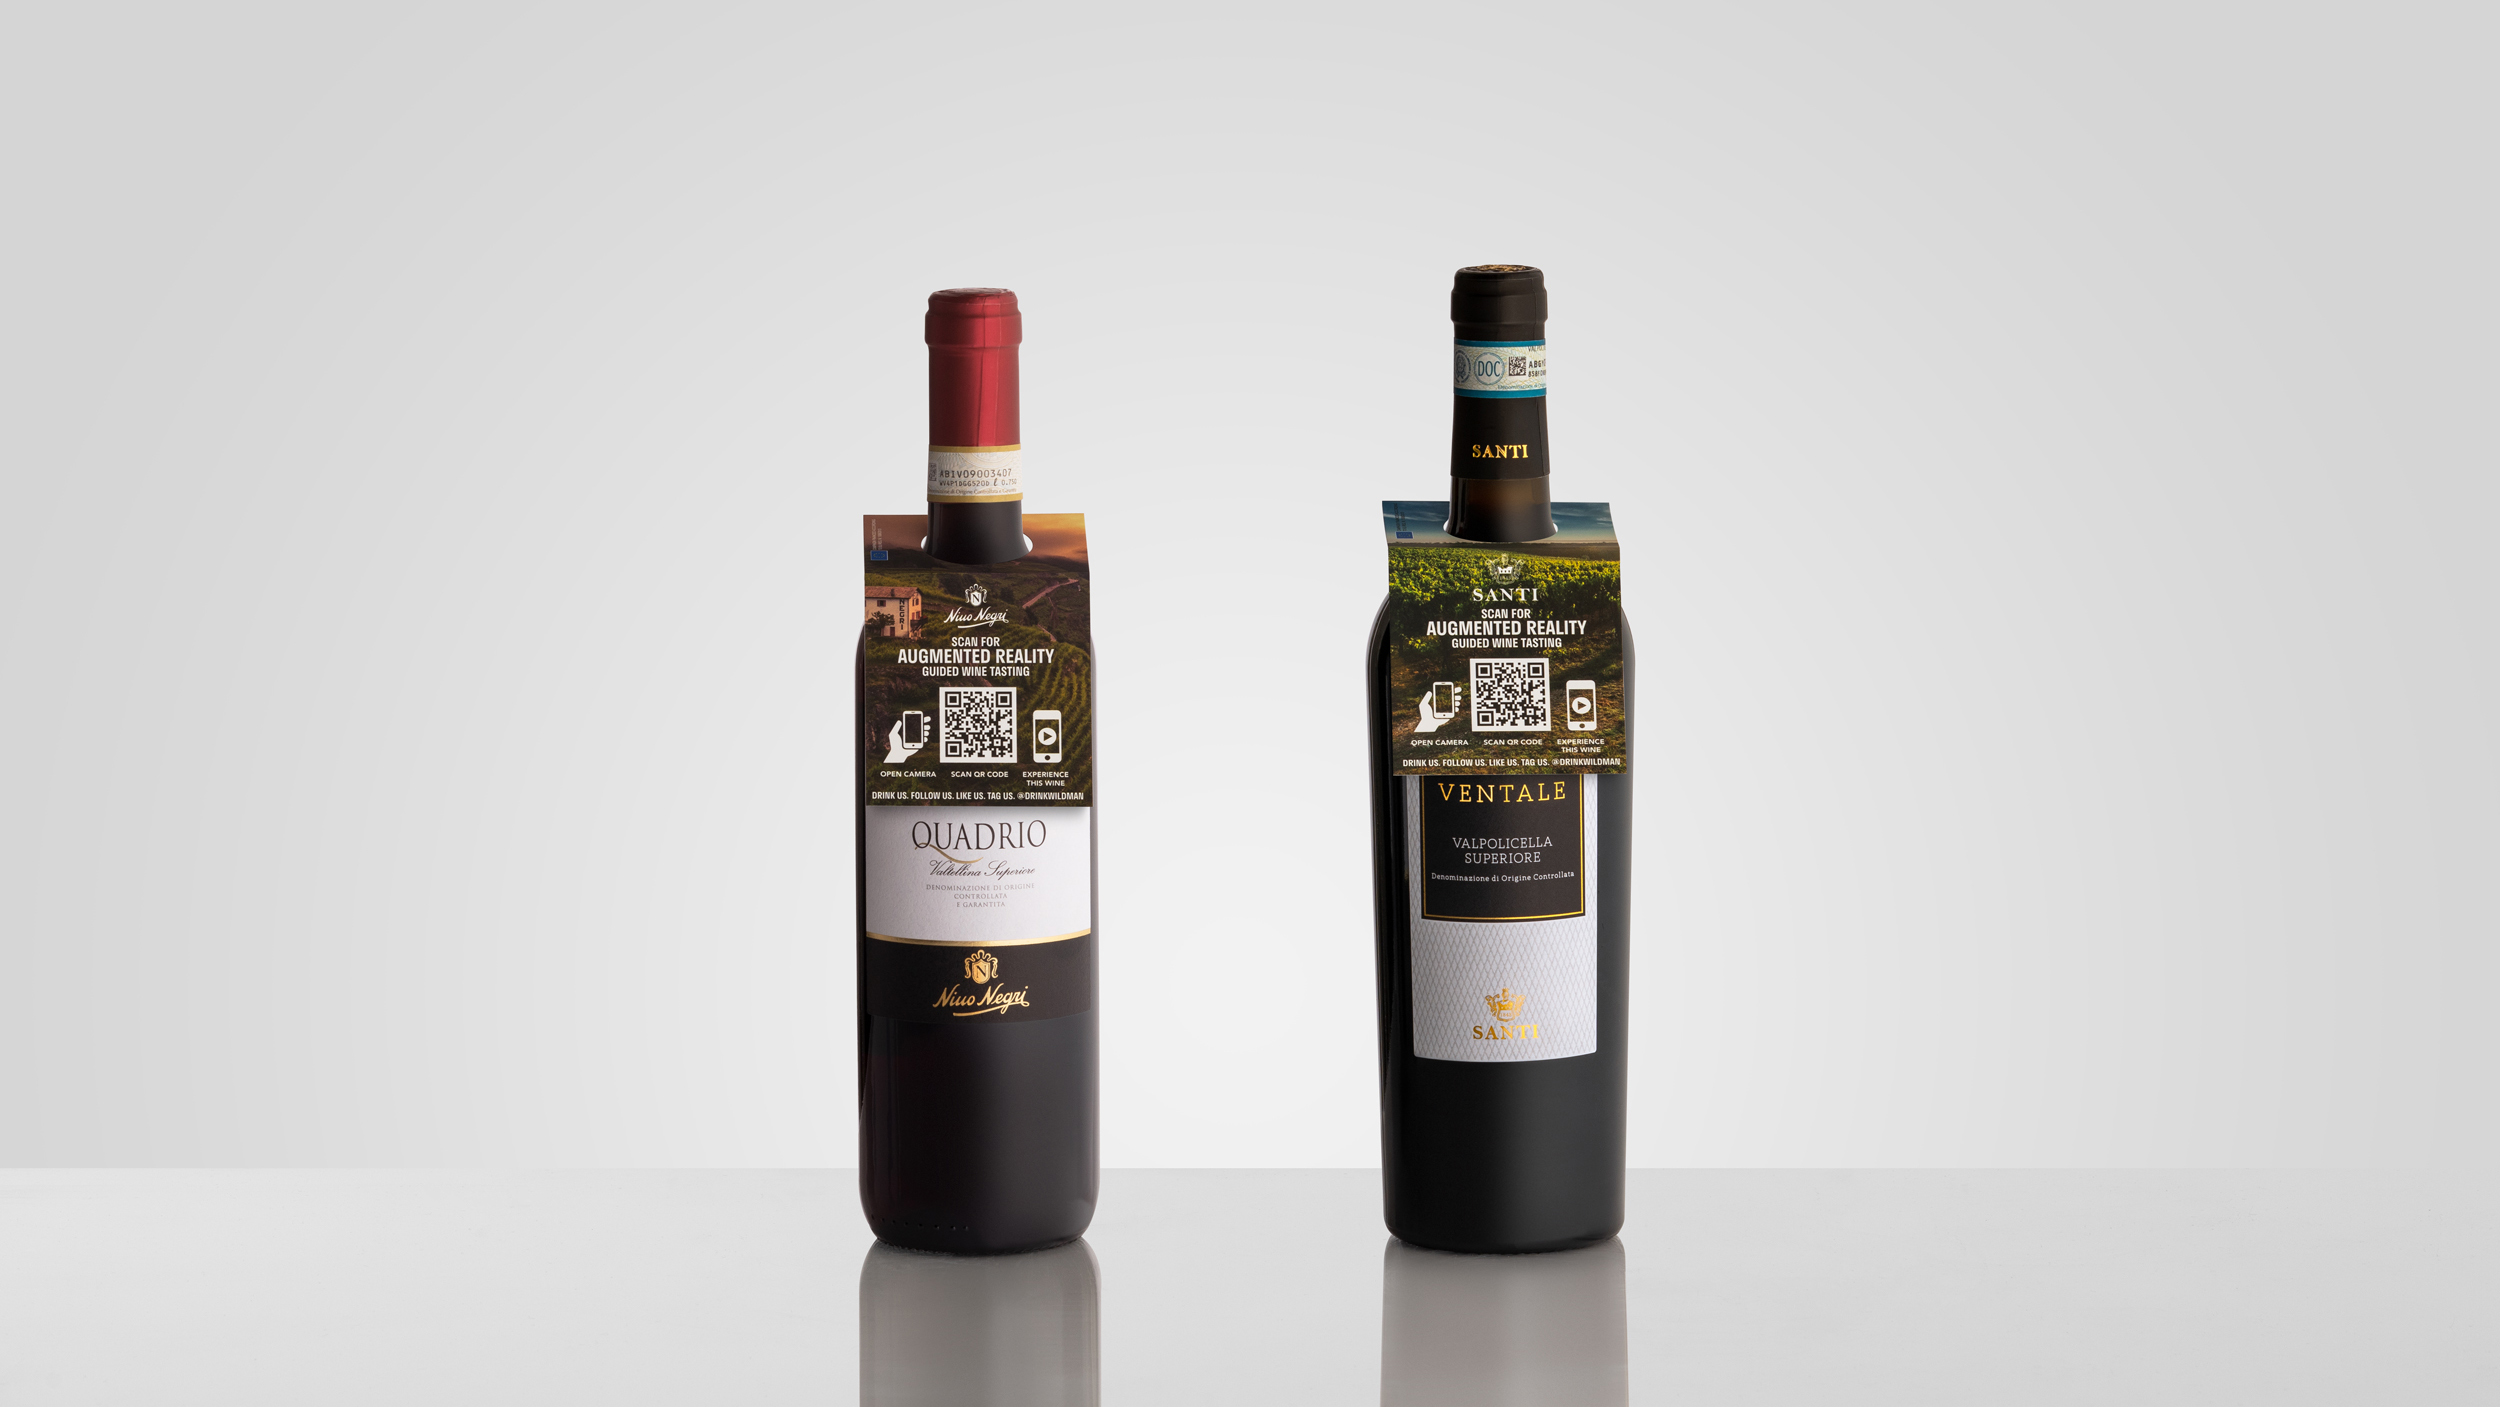 Frederick Wildman & Sons Launches Augmented Reality Experience For Italian Wine Portfolio